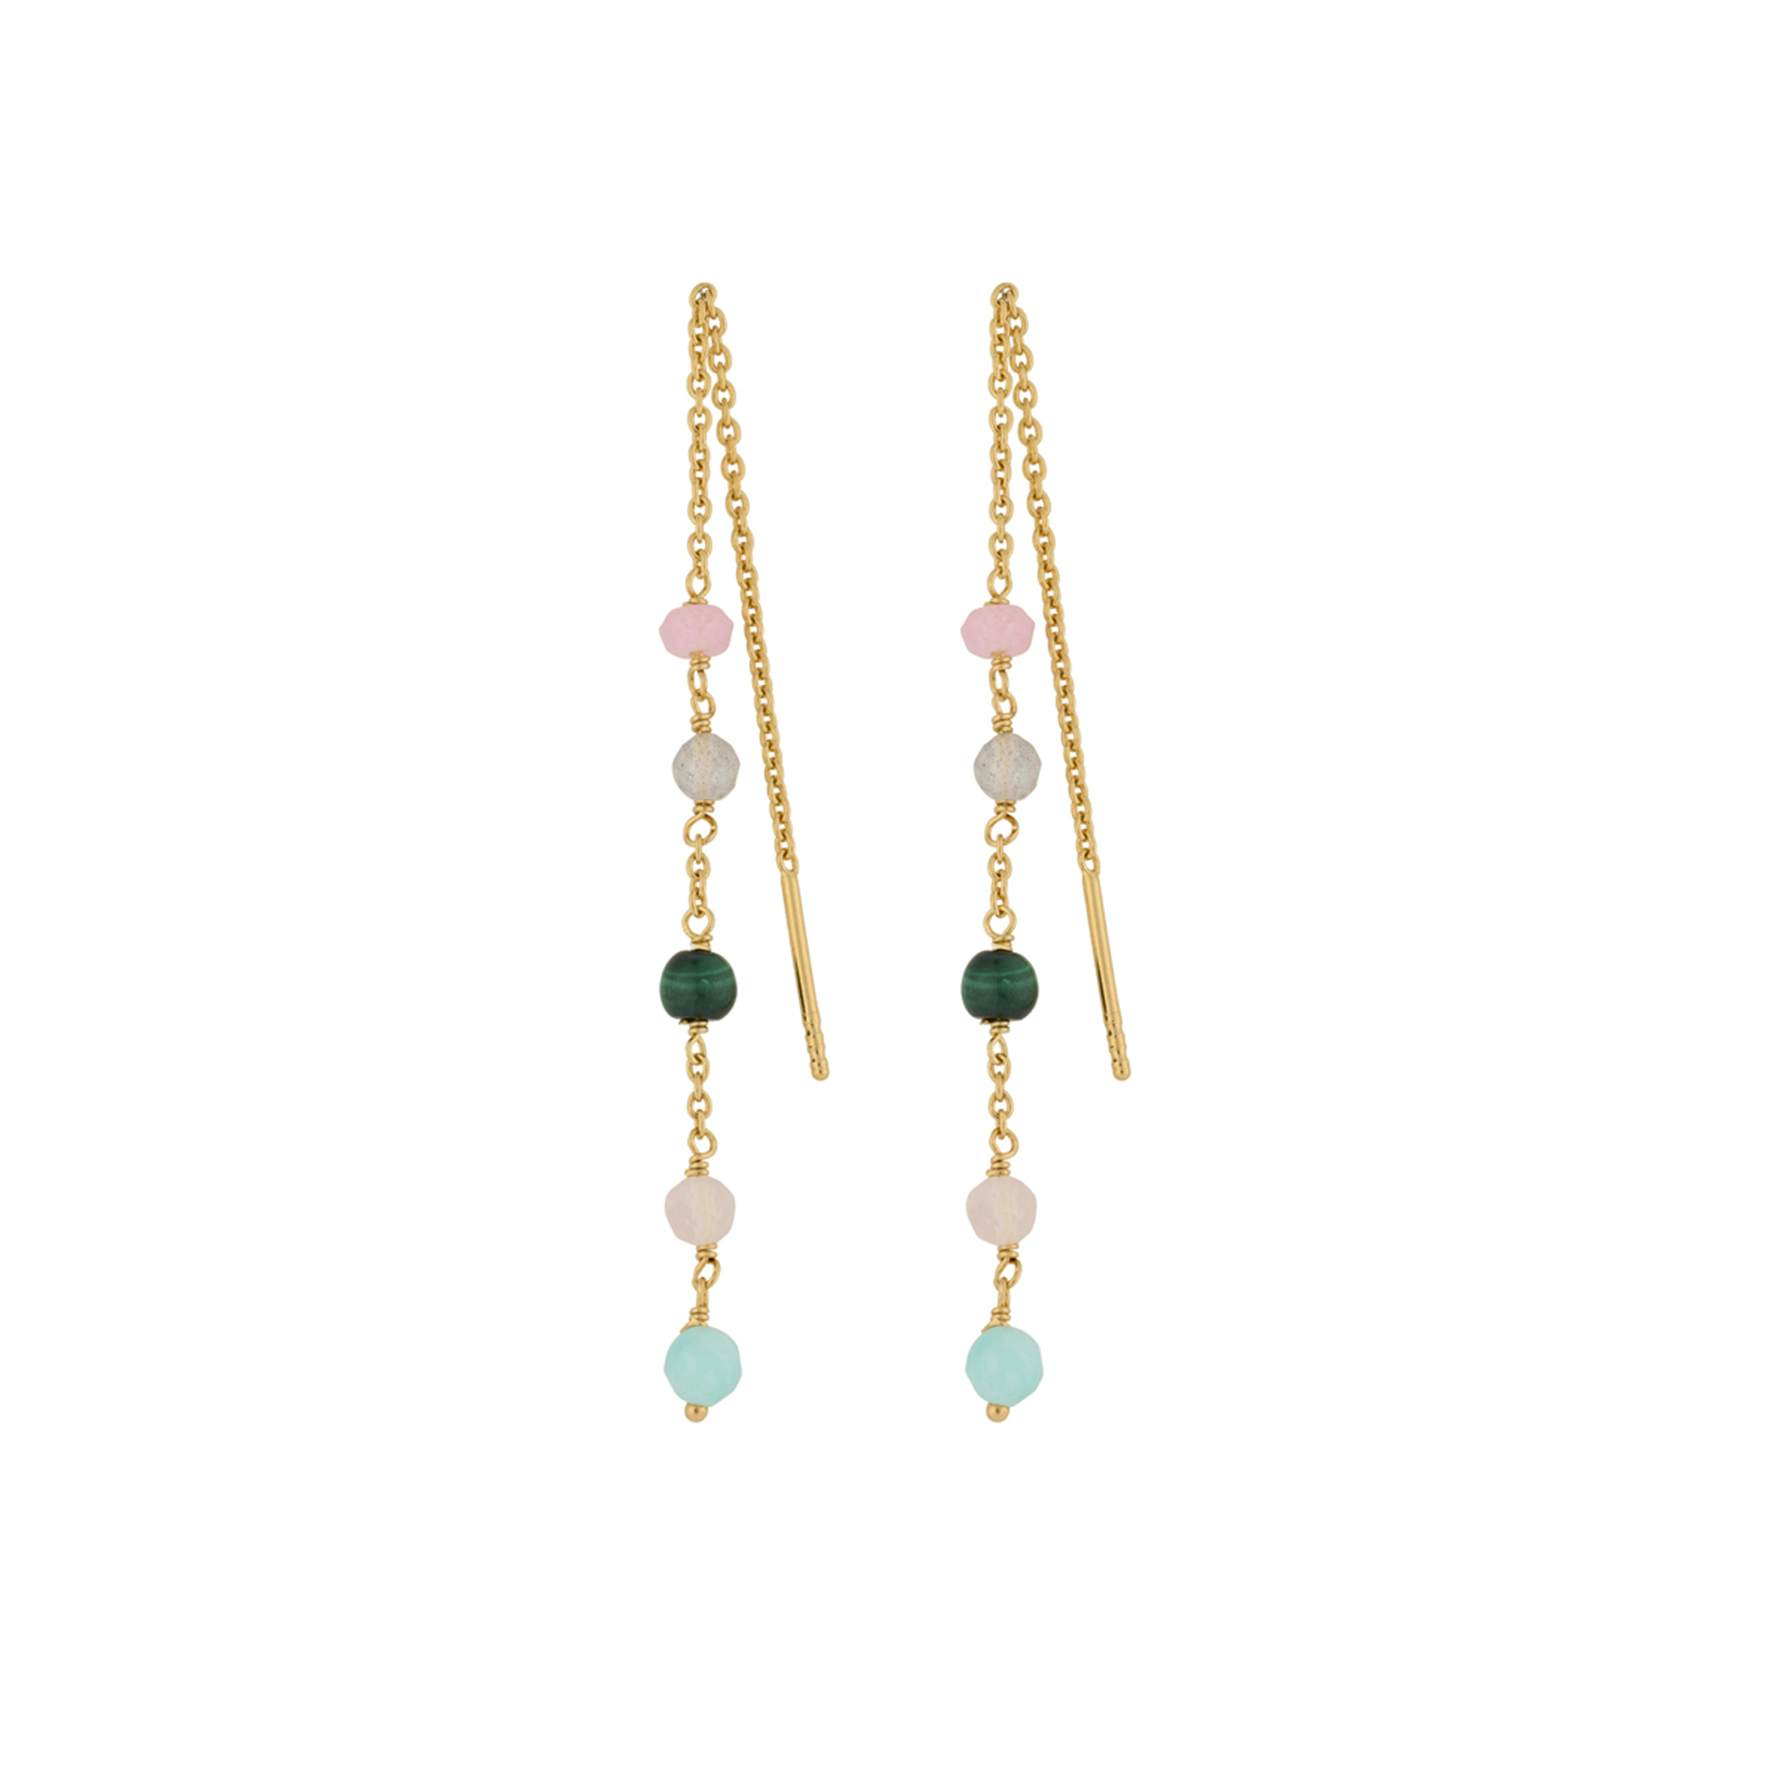 Harmony Earchains from Pernille Corydon in Goldplated-Silver Sterling 925